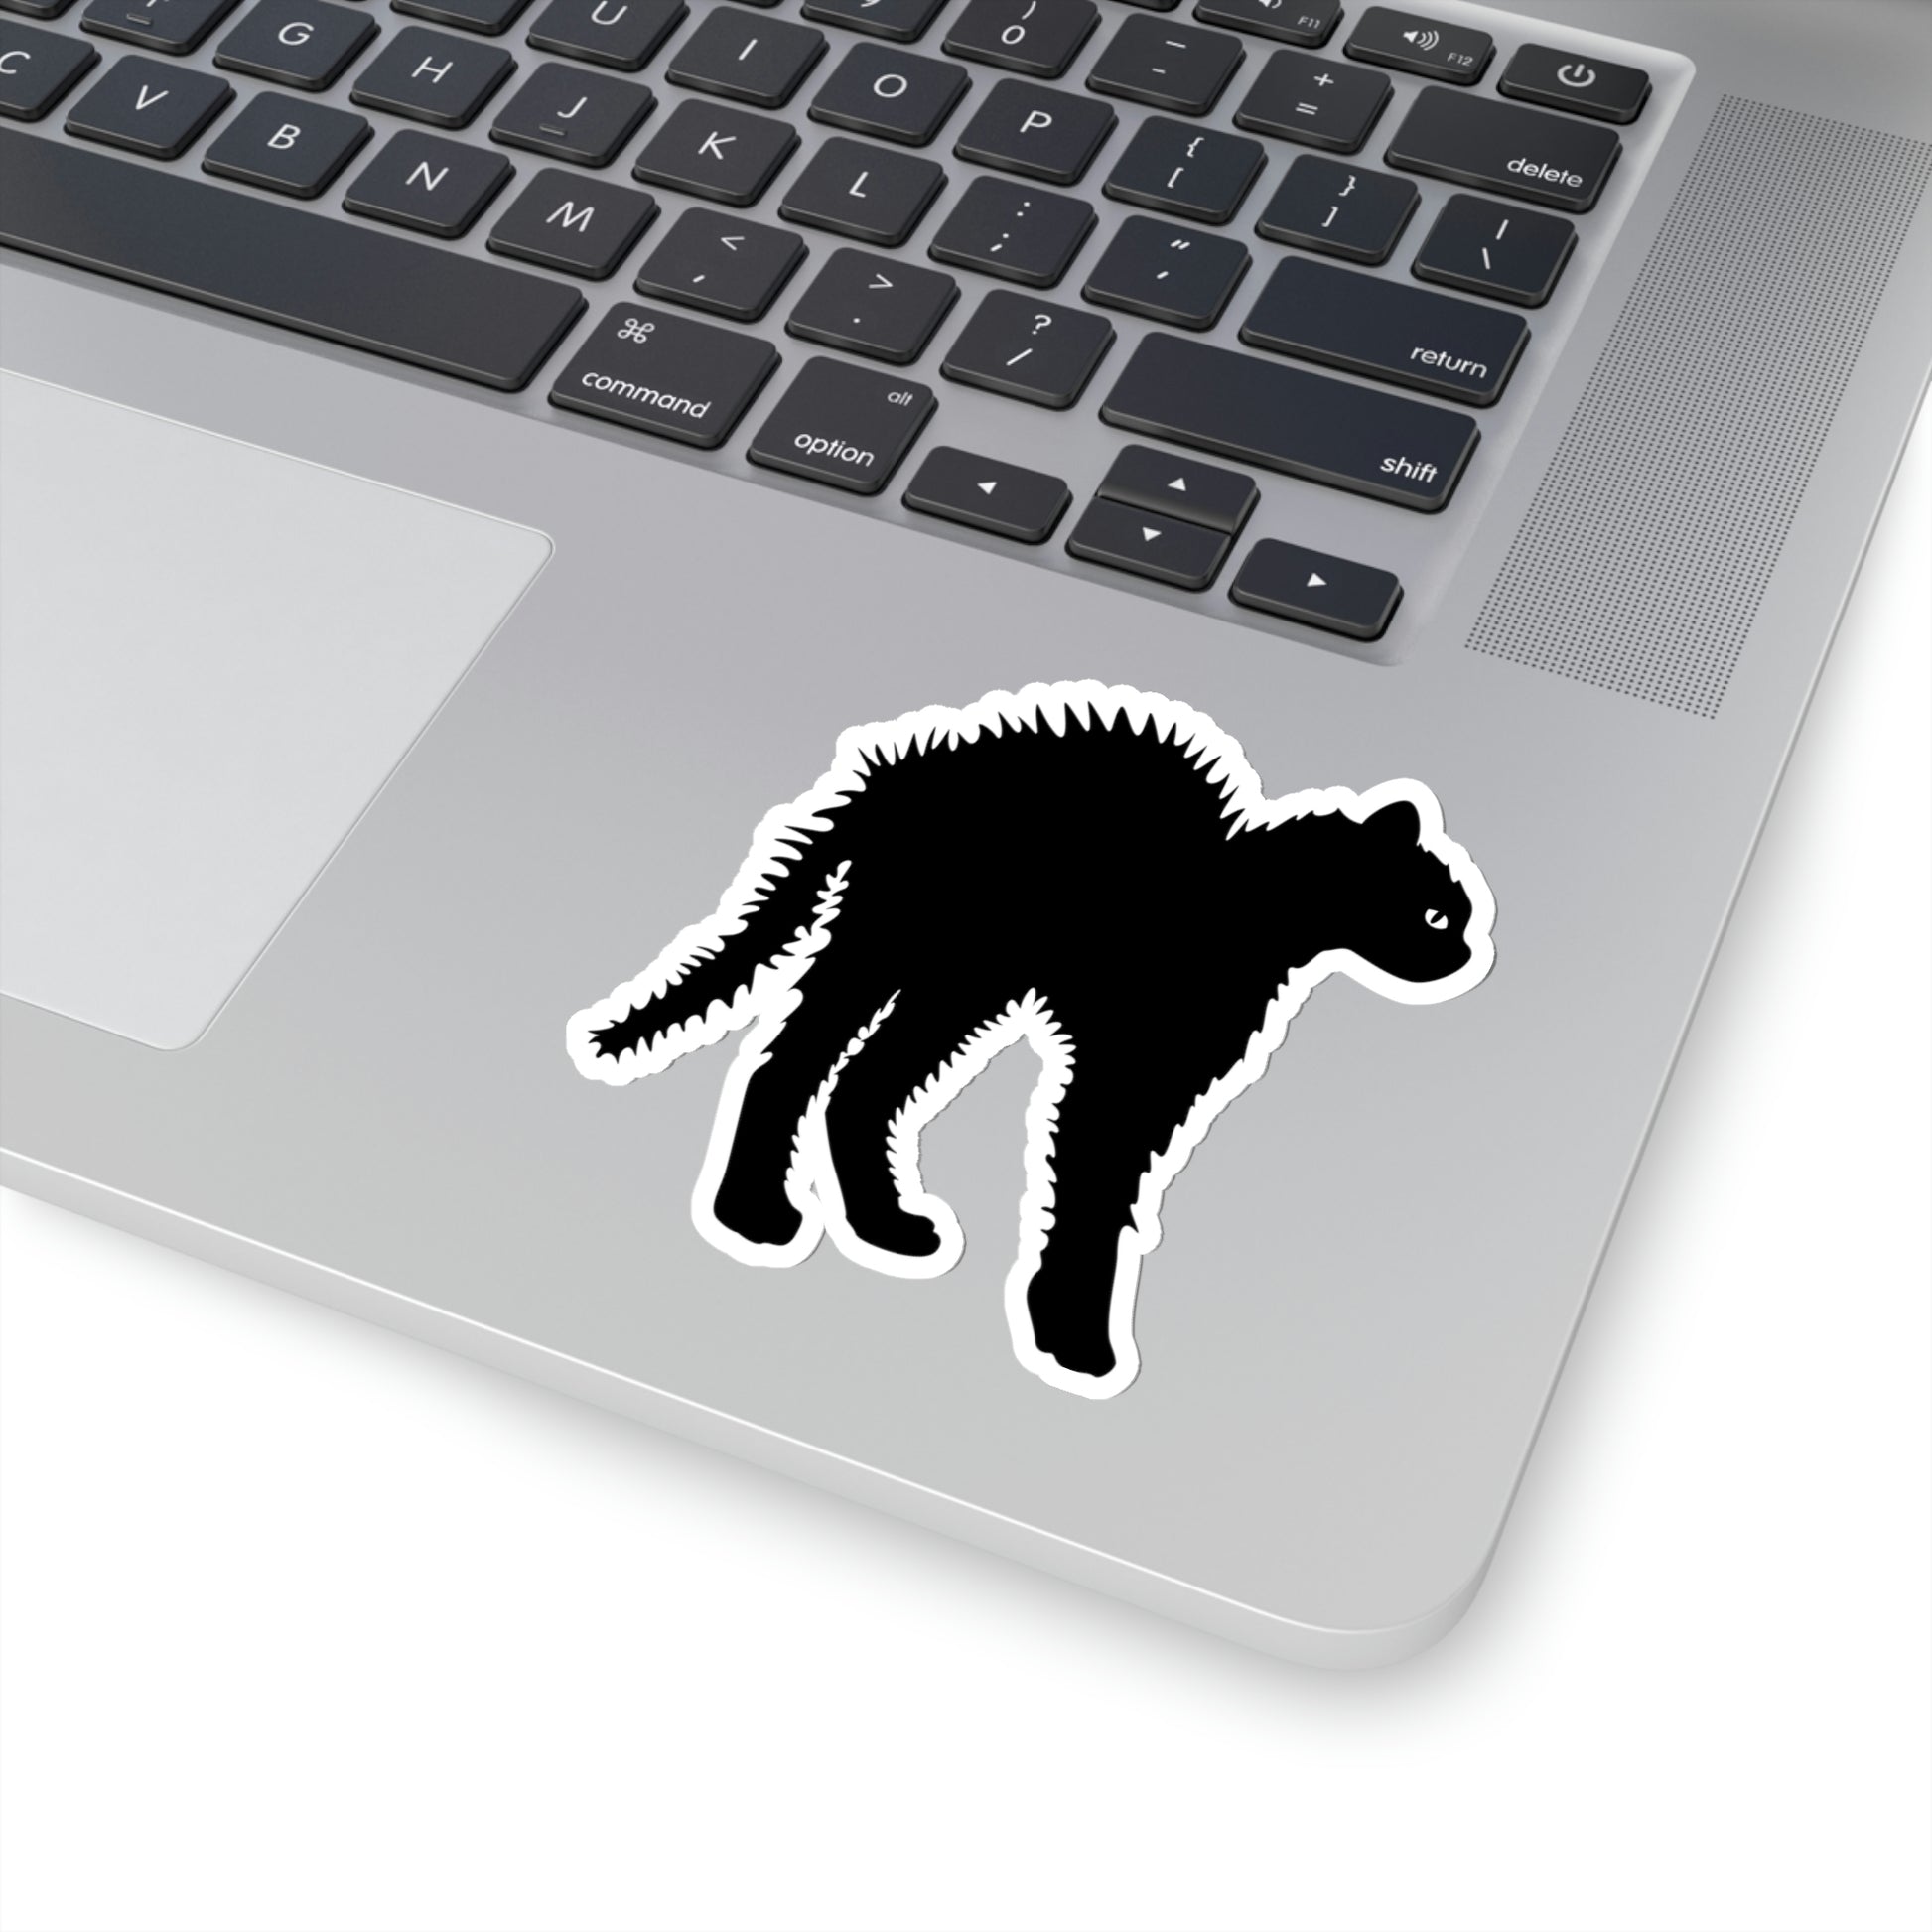 Cat Paw Prints Decal In Black for KitchenAid Mixer - Classic Cool Artistic  - also for MacBook, Laptop, Car, or Anything